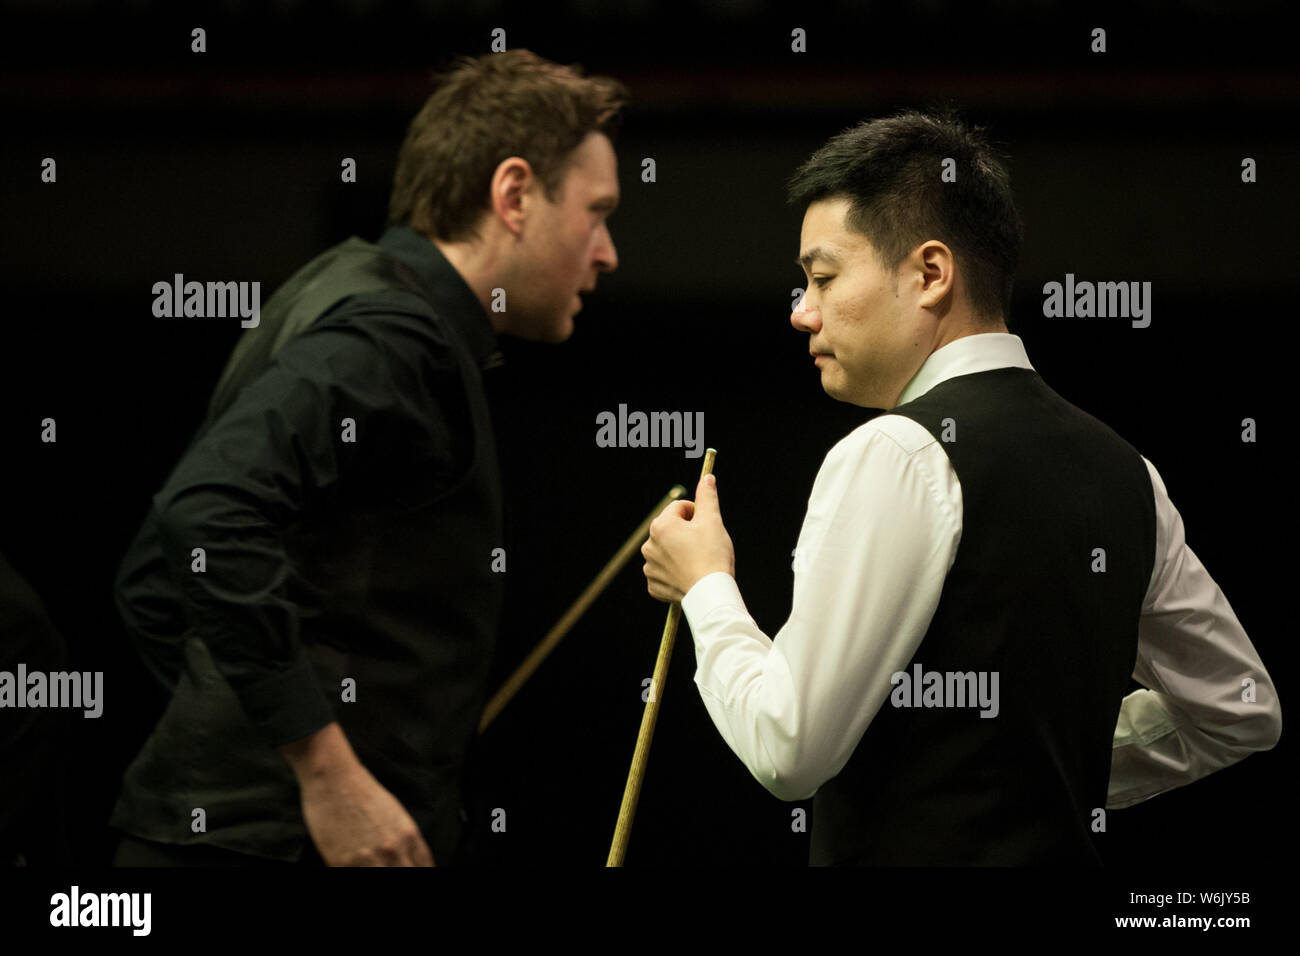 Ding Junhui of China, right, interacts with Ricky Walden of England in their second round match during the 2018 D88 German Masters snooker tournament Stock Photo